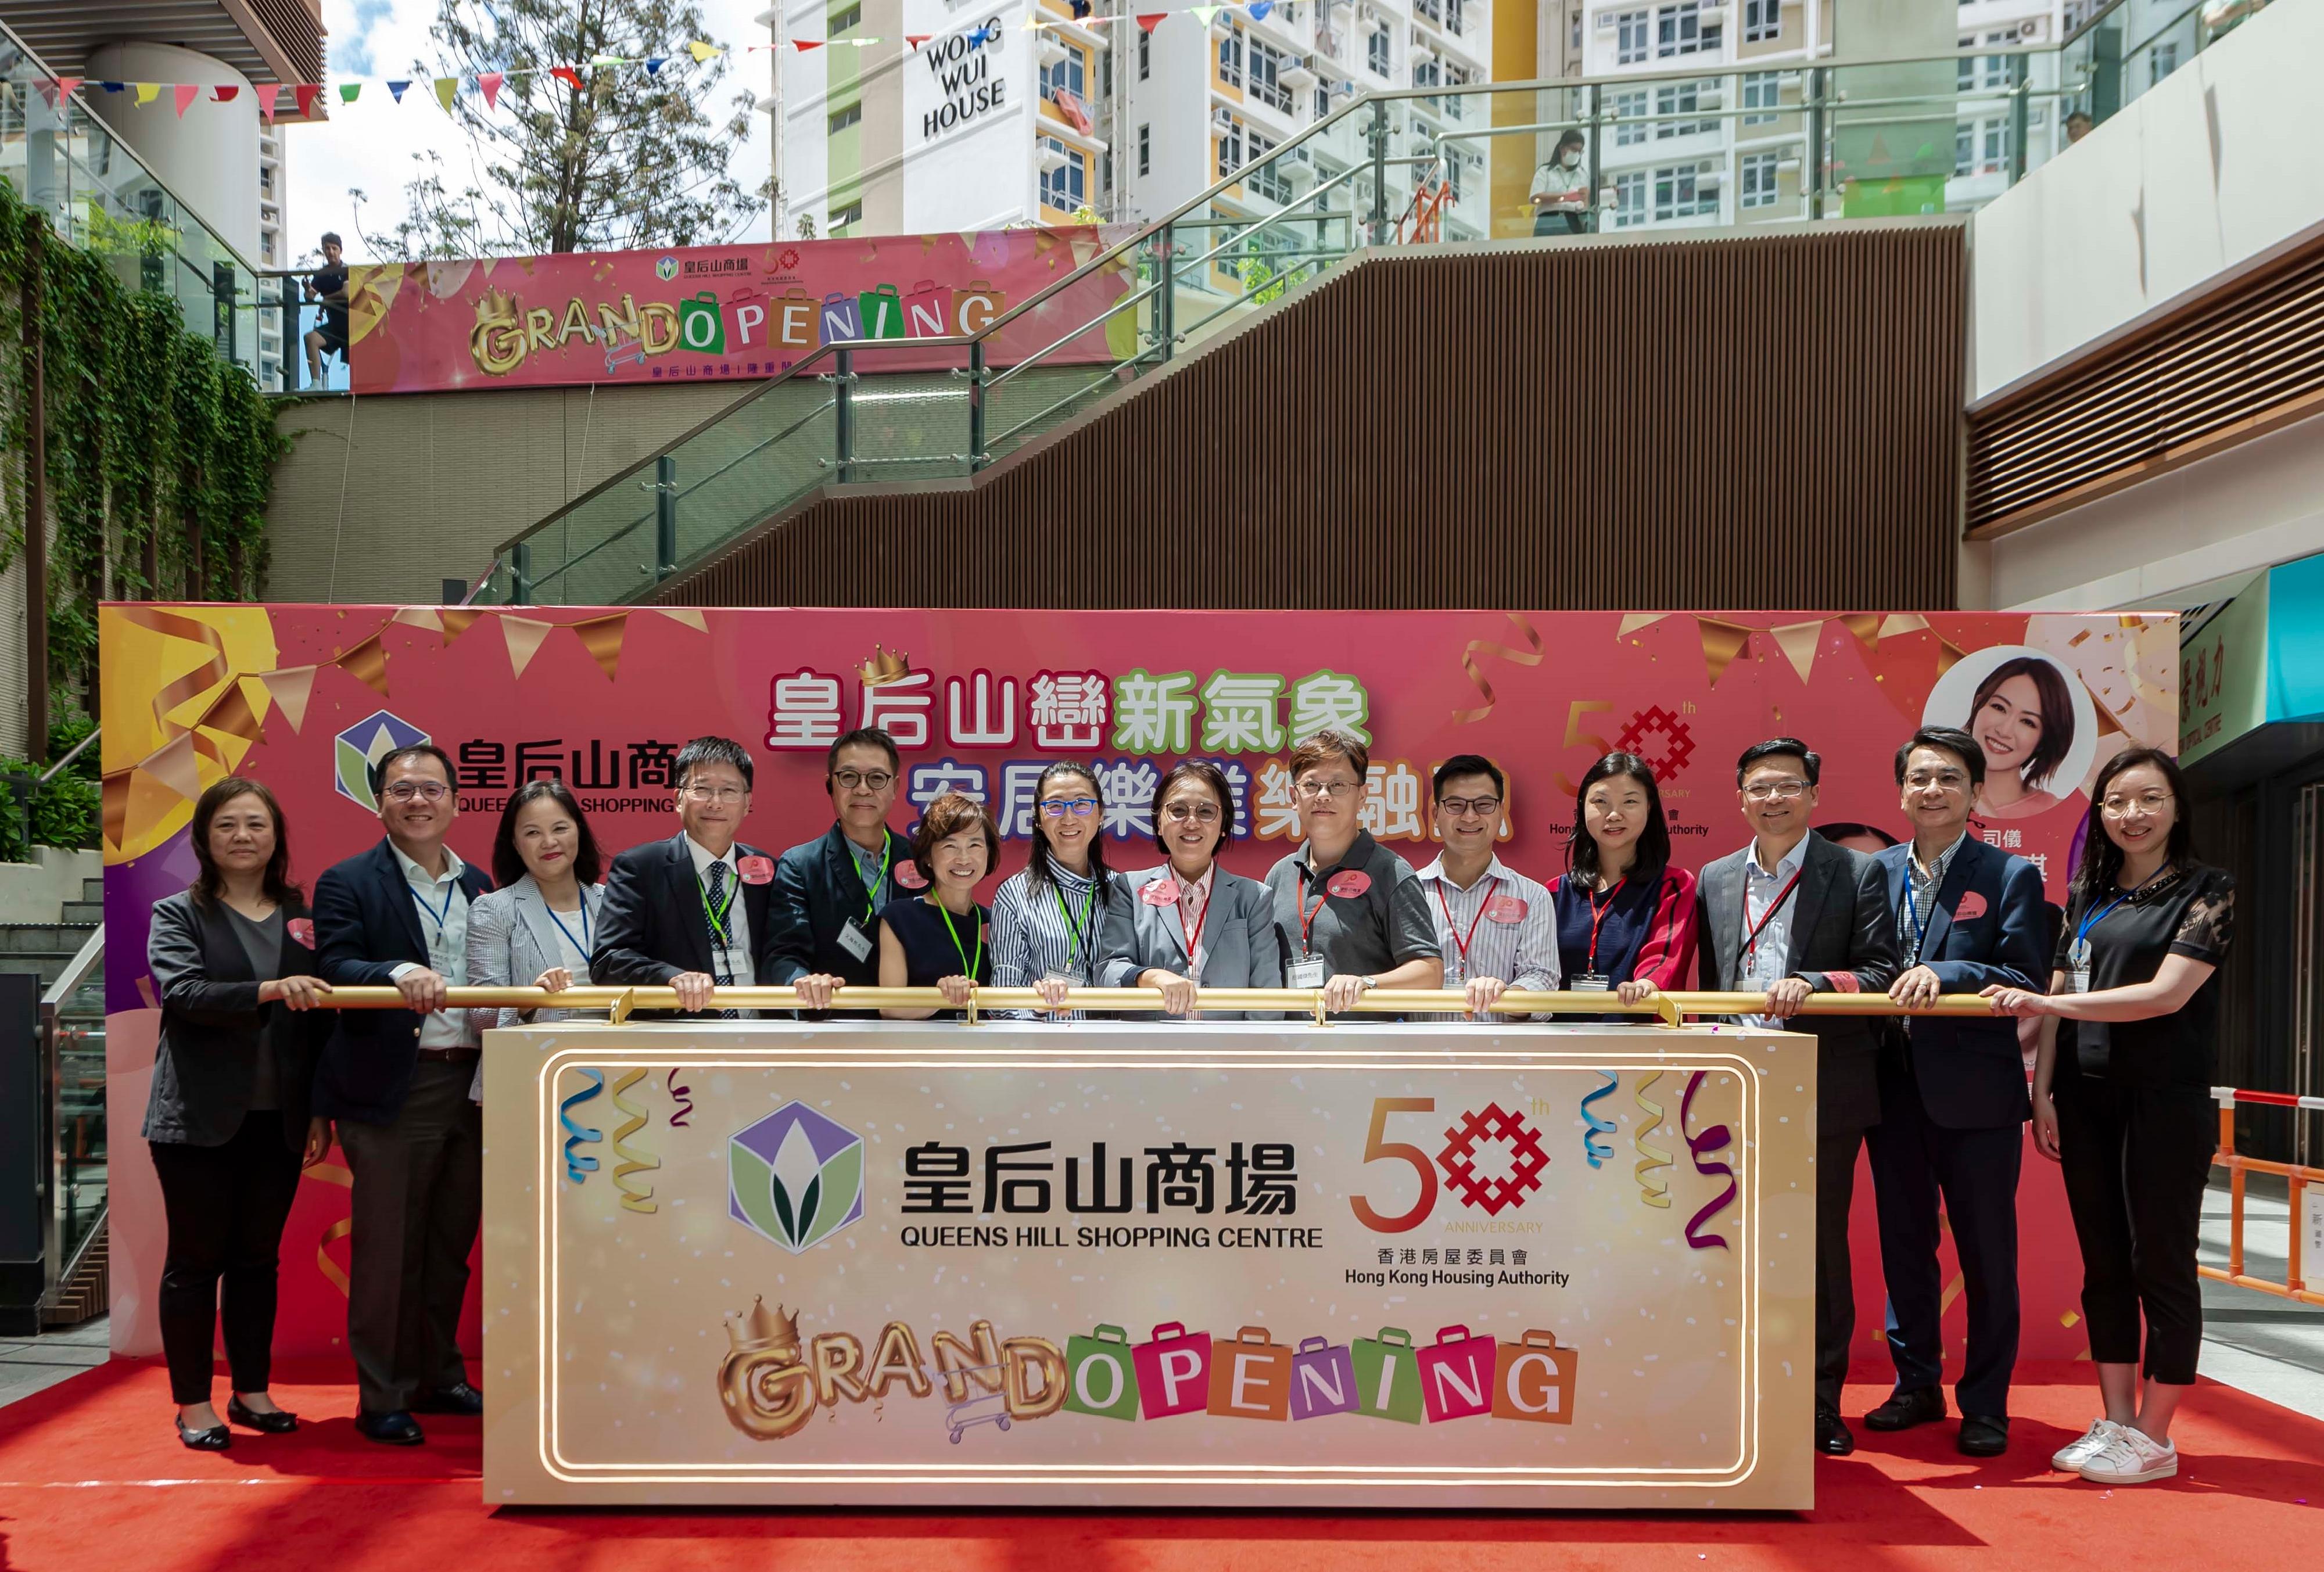 Members of the Hong Kong Housing Authority (HA) and its Commercial Properties Committee (CPC) today (June 20) officiated at the opening ceremony of the HA's Queens Hill Shopping Centre in Fanling. Photo shows the Chairman of the CPC, Ms Serena Lau (seventh right), HA/CPC members and Assistant Directors of Housing  (Estate Management) Mr Yim Ka-ho (second right), Mrs Tang Fung Shuk-yin (third left) and Mr Michael Hong (second left).